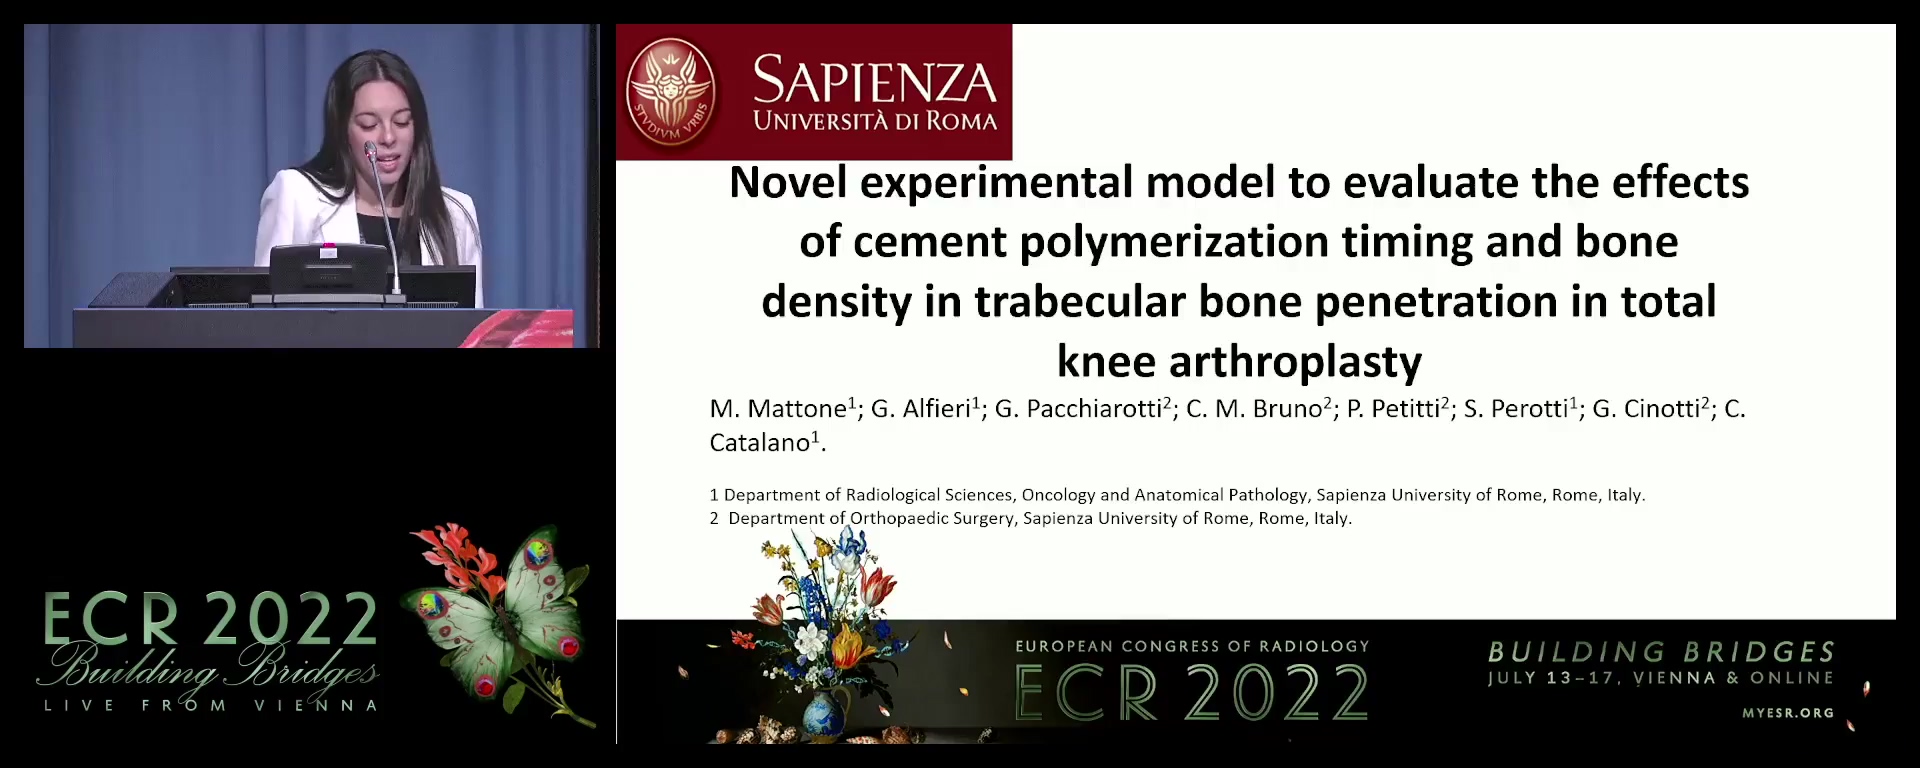 Novel experimental model to evaluate the effects of cement polymerization timing and bone density in trabecular bone penetration in total knee arthroplasty